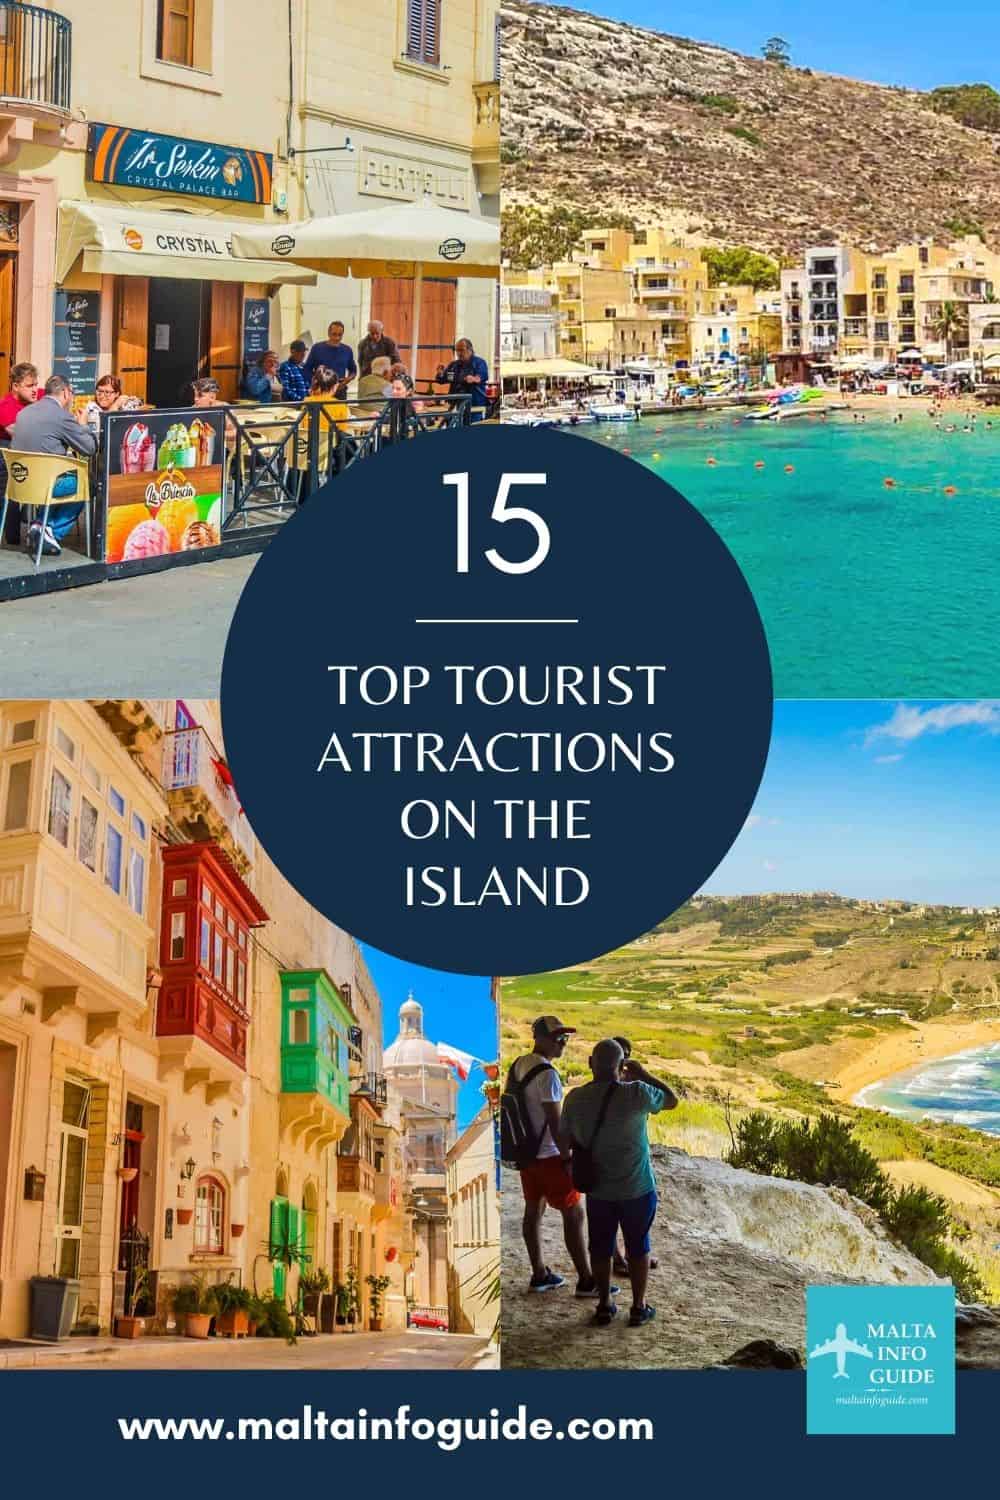 Our ultimate guide to the top tourist attractions on the islands of Malta and Gozo. Save on Pinterest.